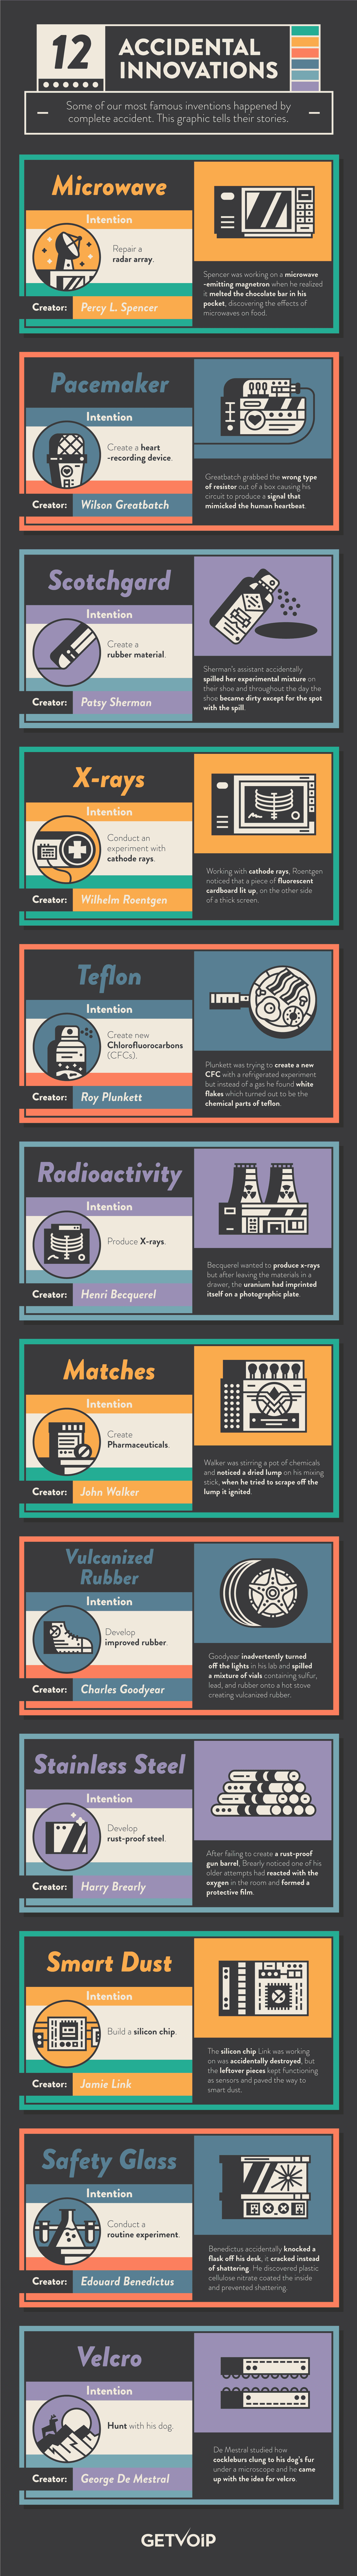 Accidental Innovations Infographic